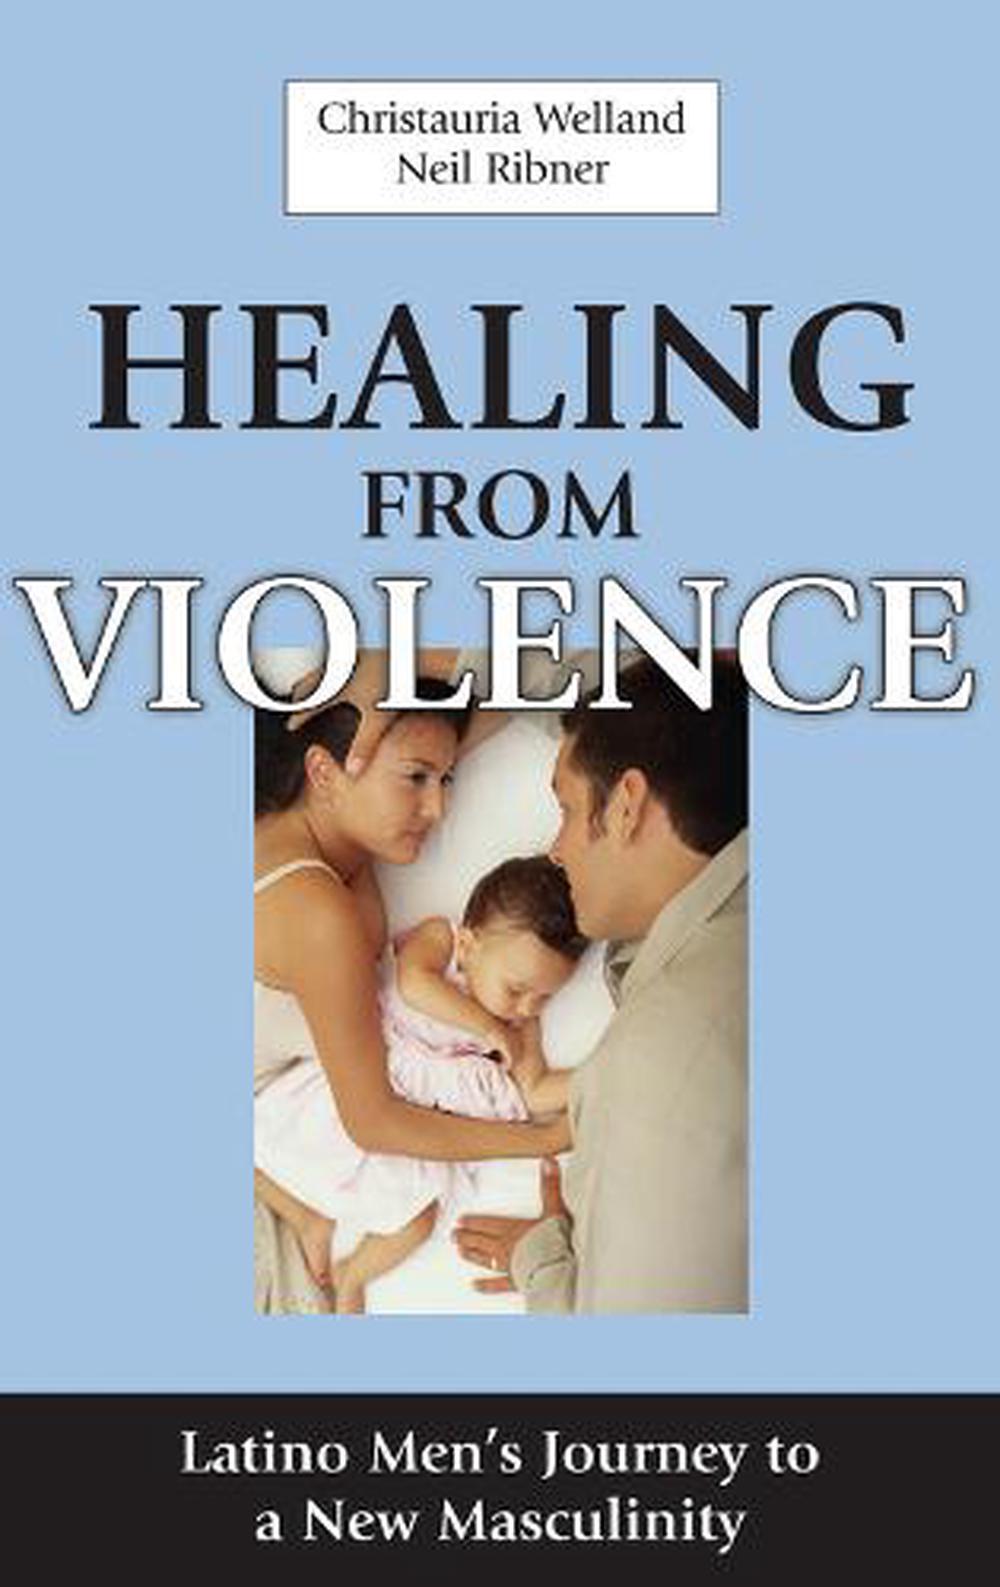 Healing from Violence Latino Men's Journey to a New Masculinity by Christauria eBay